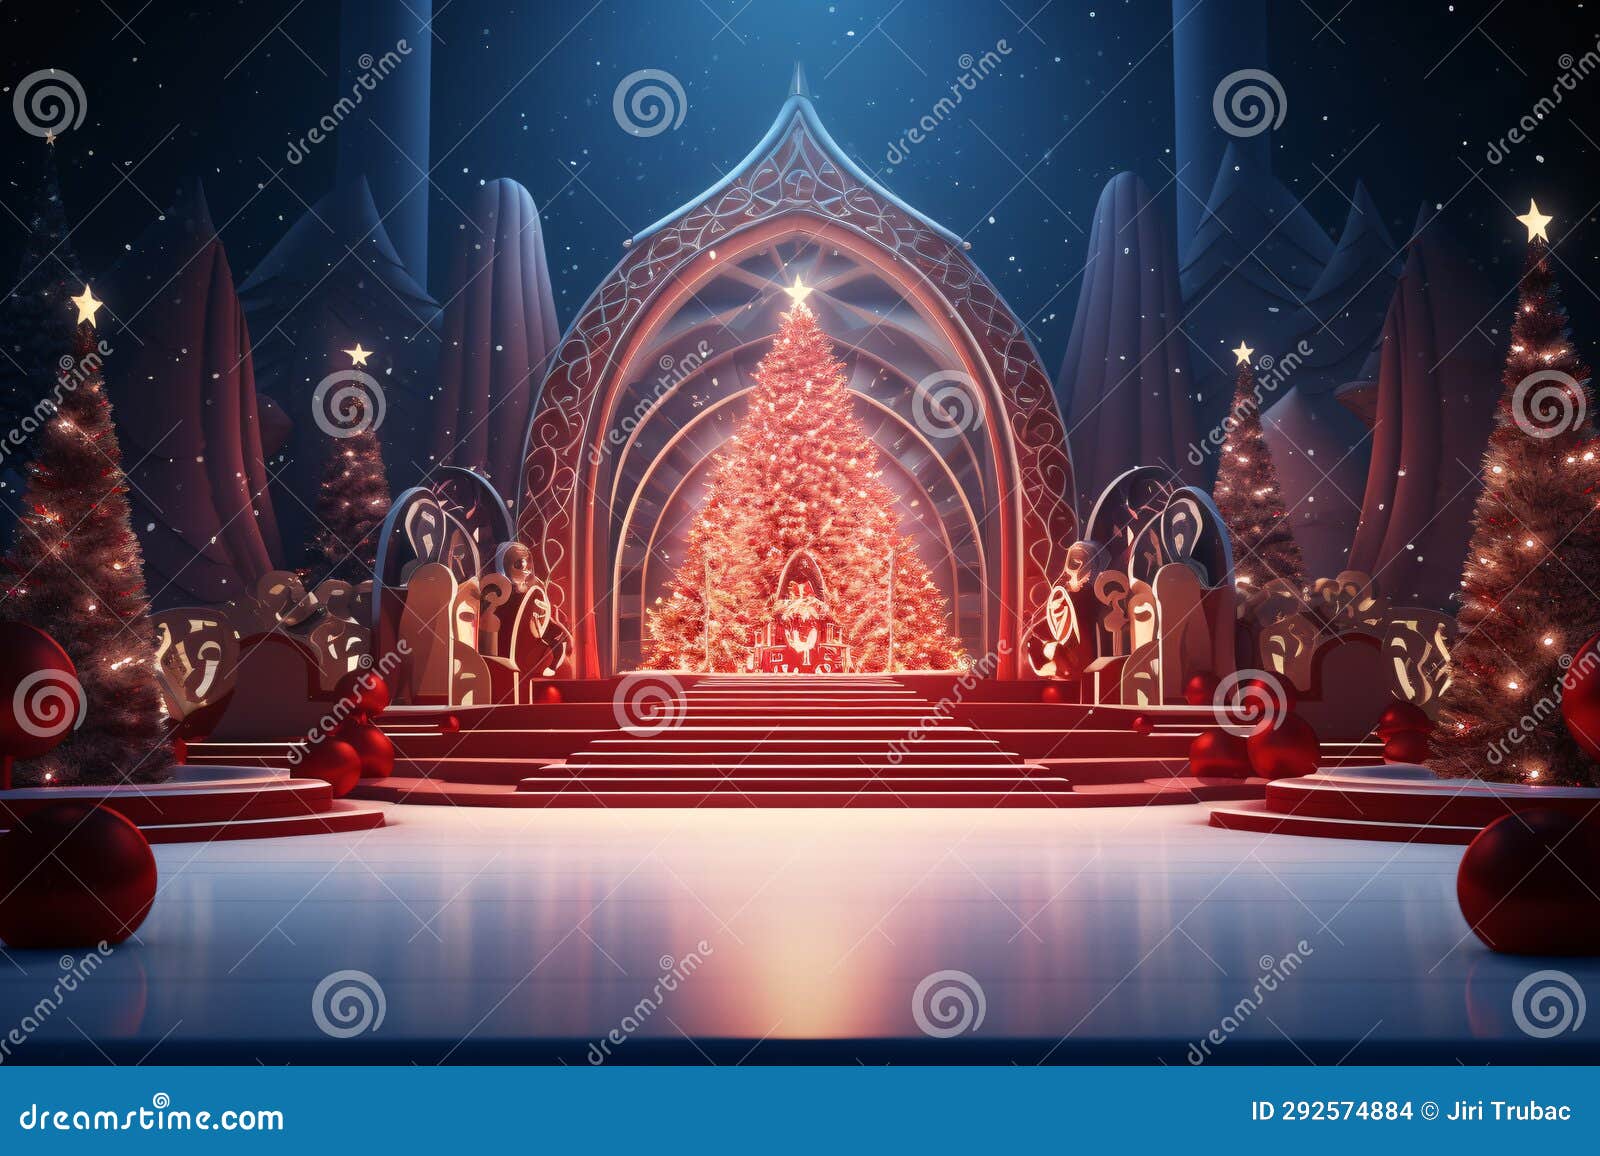 Christmas Stage with a Large Christmas Tree and the Illuminated Stage ...